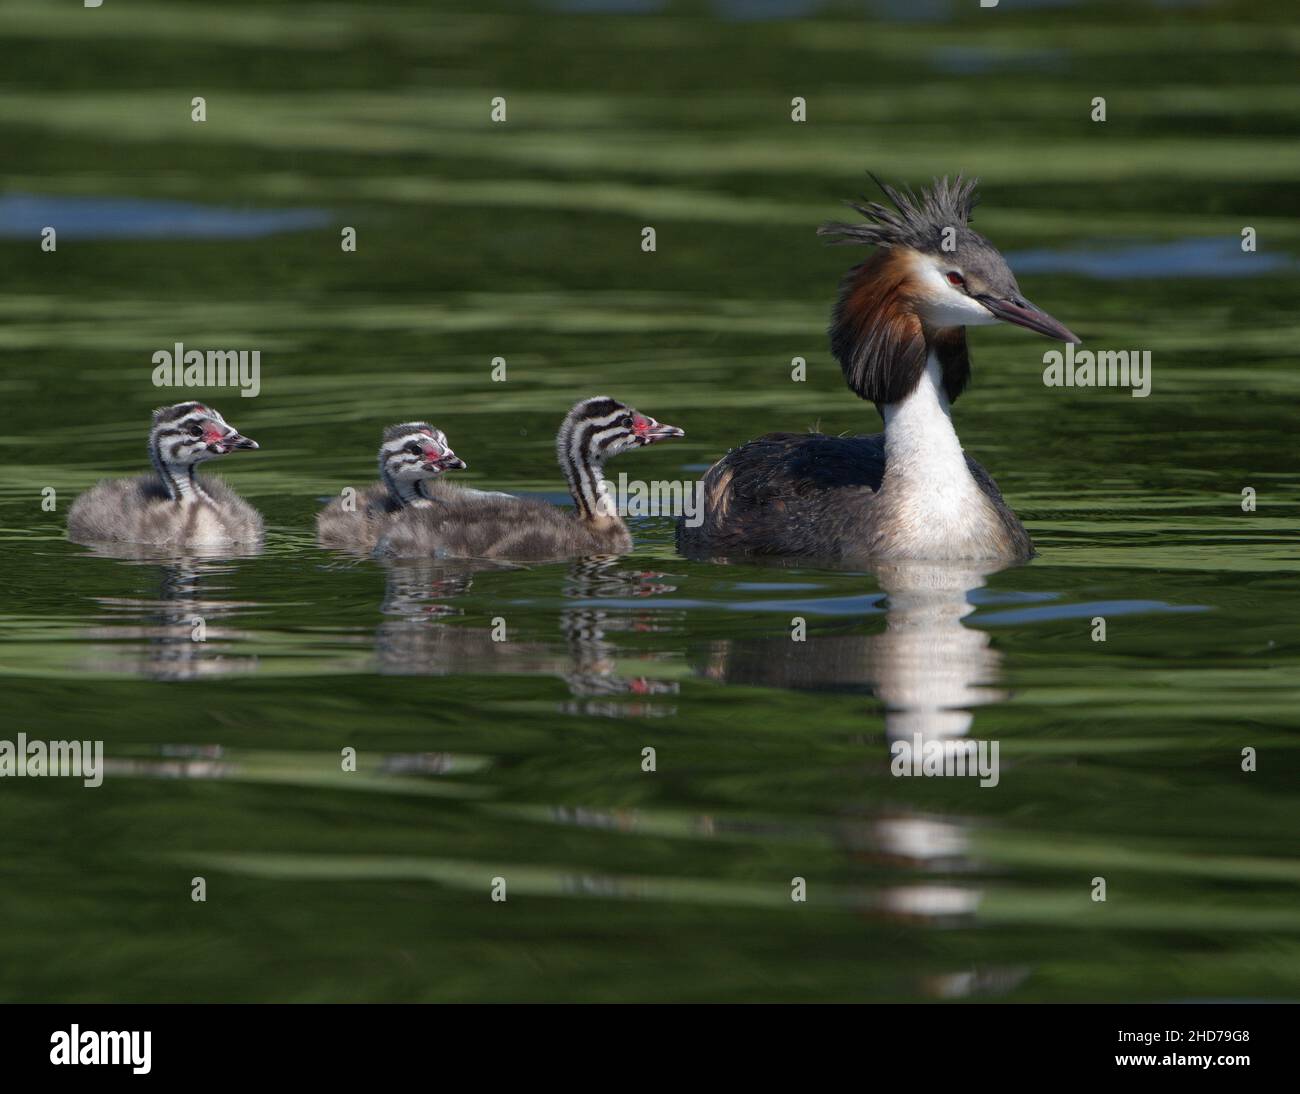 Greate Crested Grebe with chicks Västervik Småland Sweden. Stock Photo